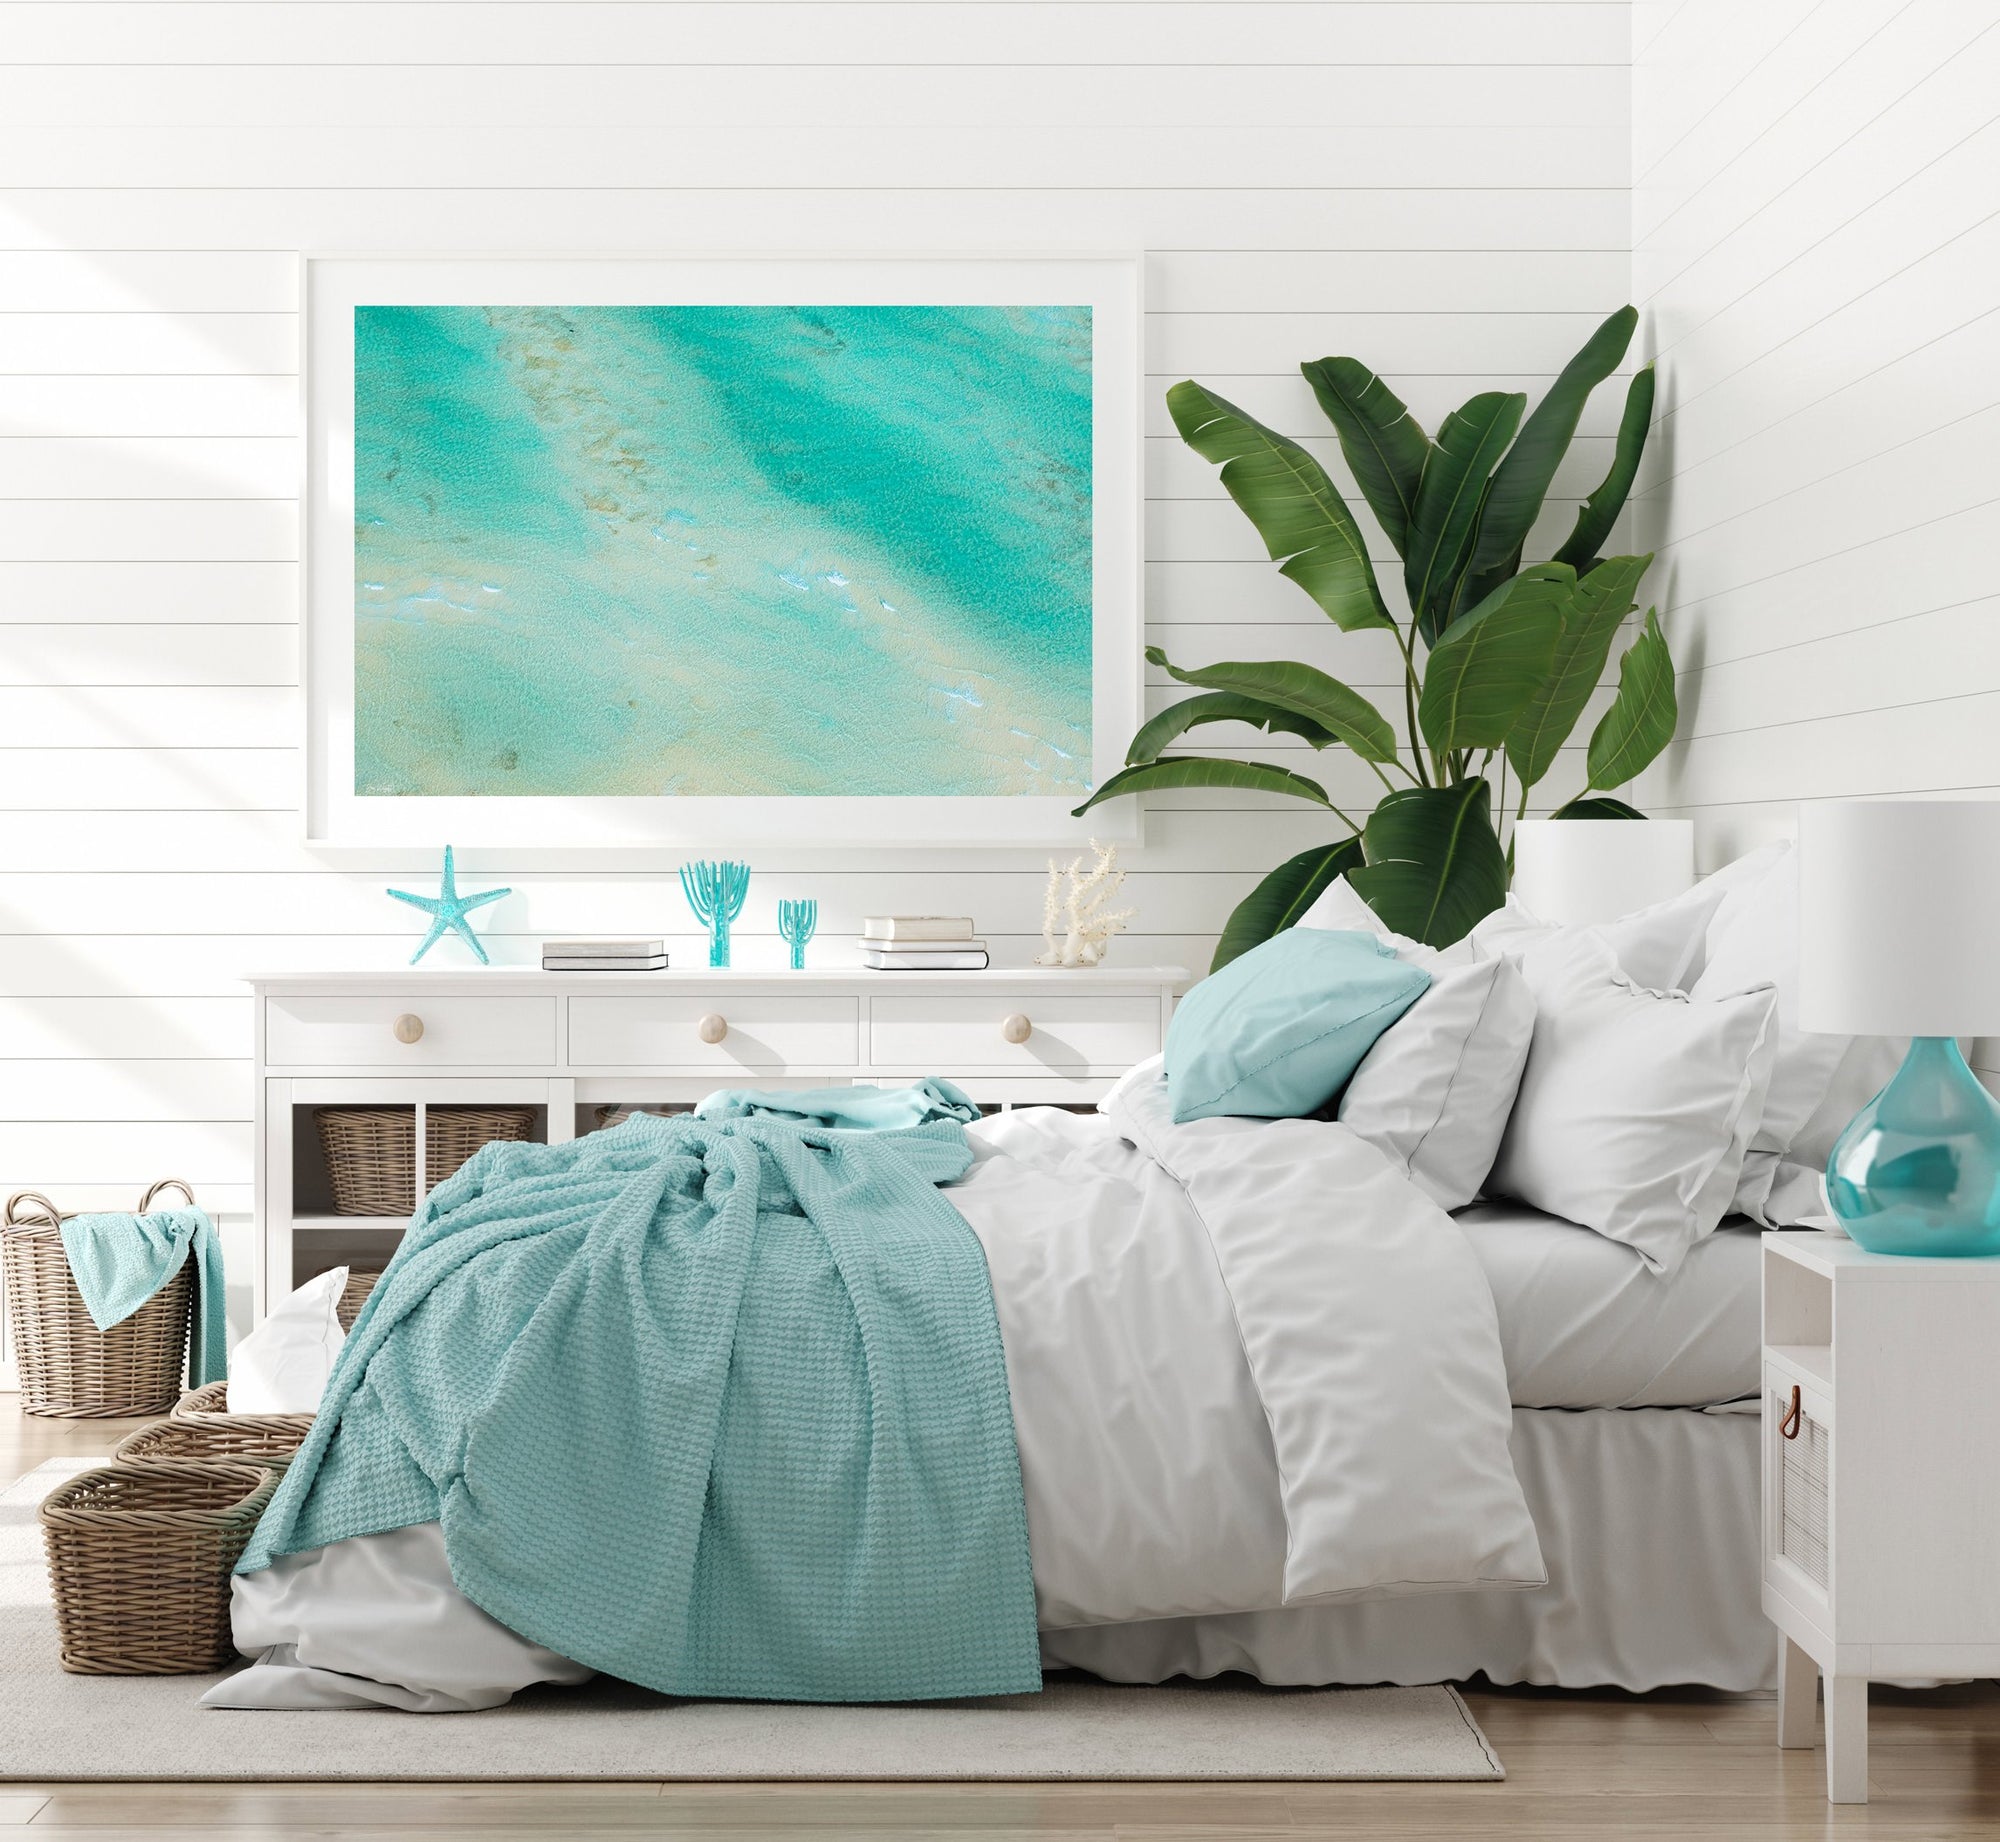 White framed wall art with turquoise aerial beach print